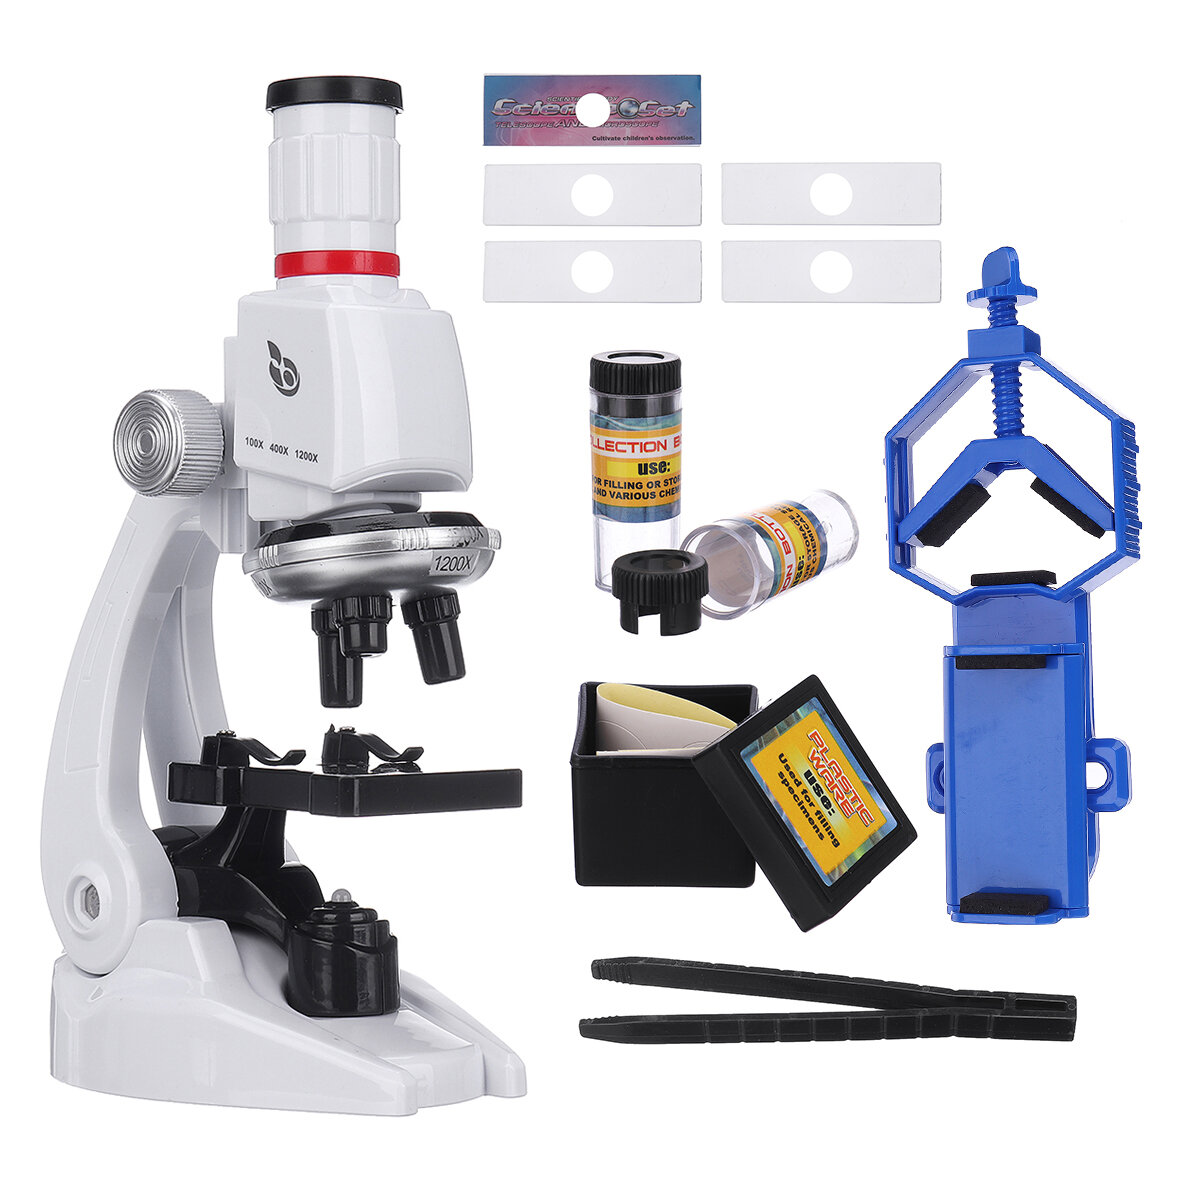 

Simulation Science Education Experiment HD 1200x Biological Microscope With Phone Holder Toy Children's Microscope Set